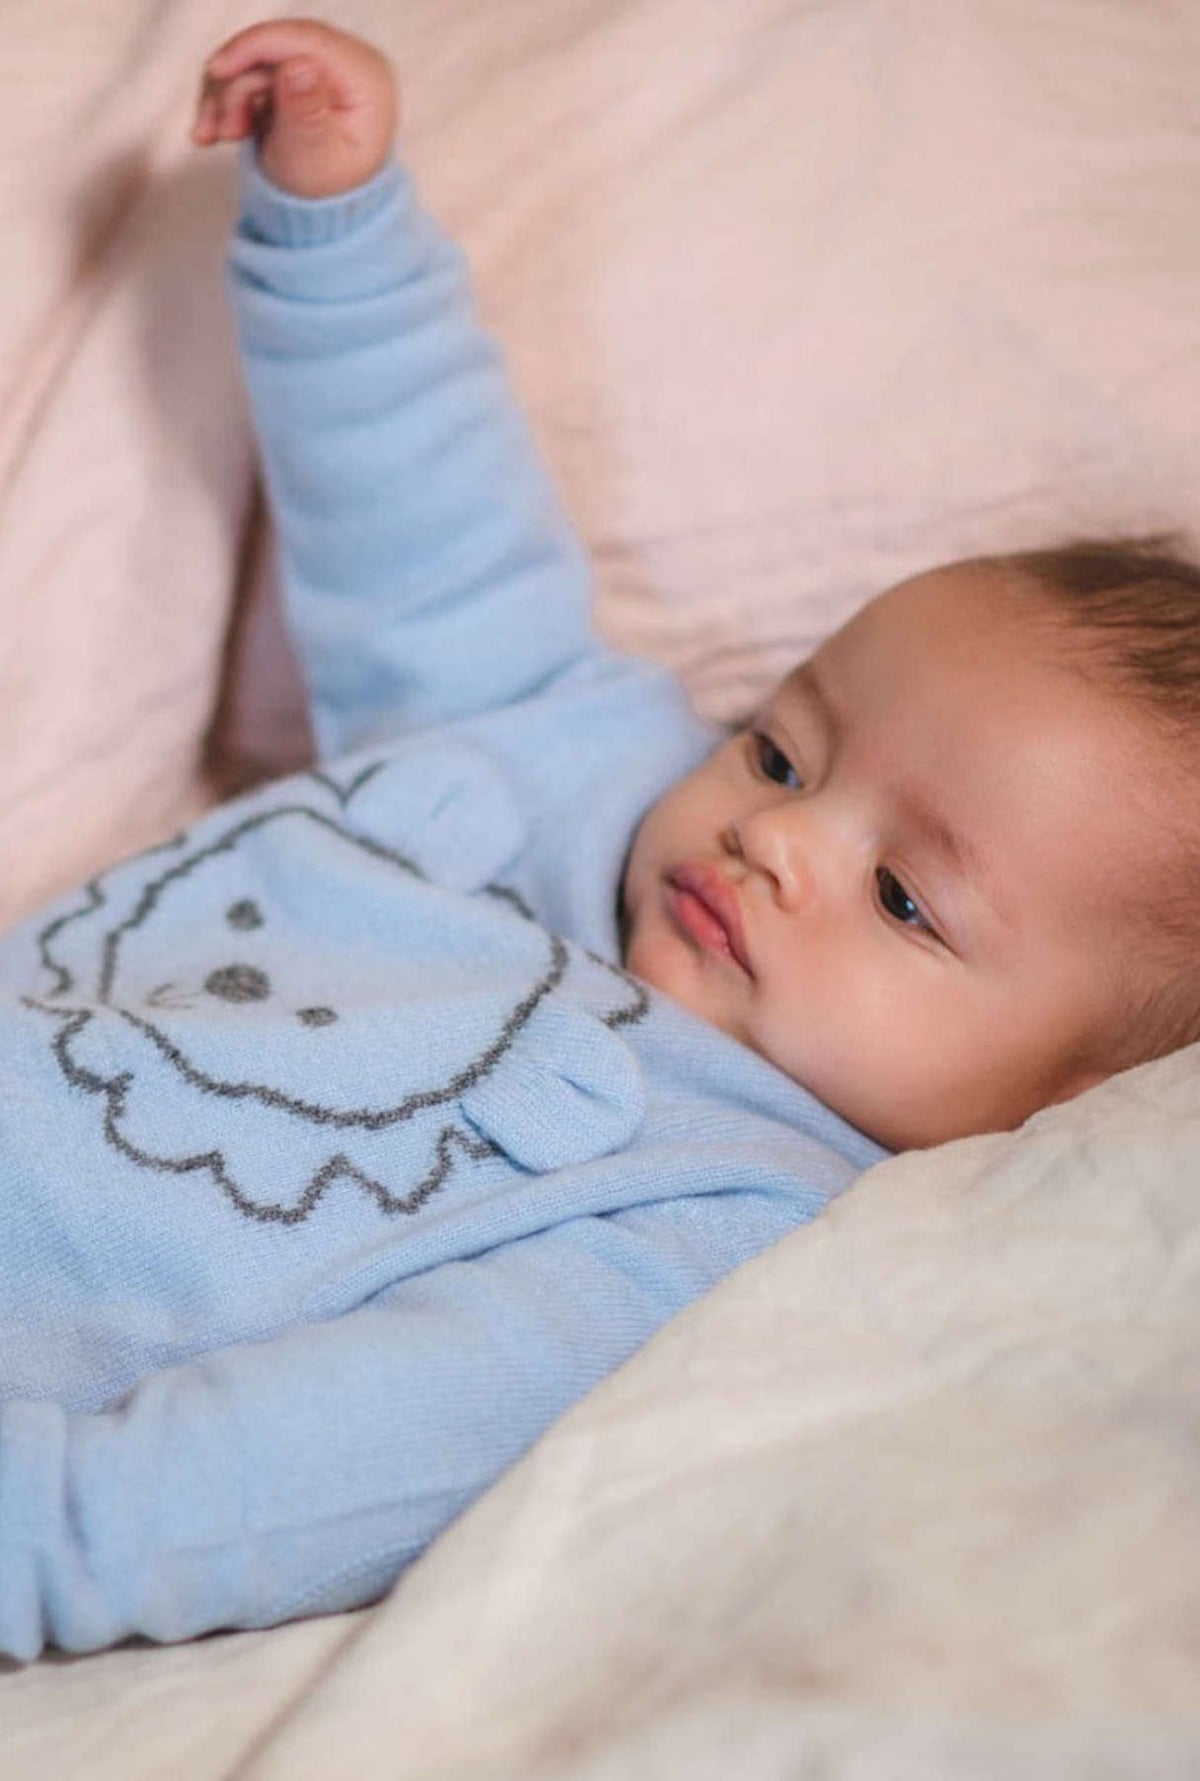 ROAR, Baby&#39;s first cashmere Jumper: a sweet little 2 ply Lion Jumper complete with 3D ears for your Little Baby Cub.   Made with pure cashmere from Inner Mongolia, it will keep your Tiny One cosy and warm all winter long.